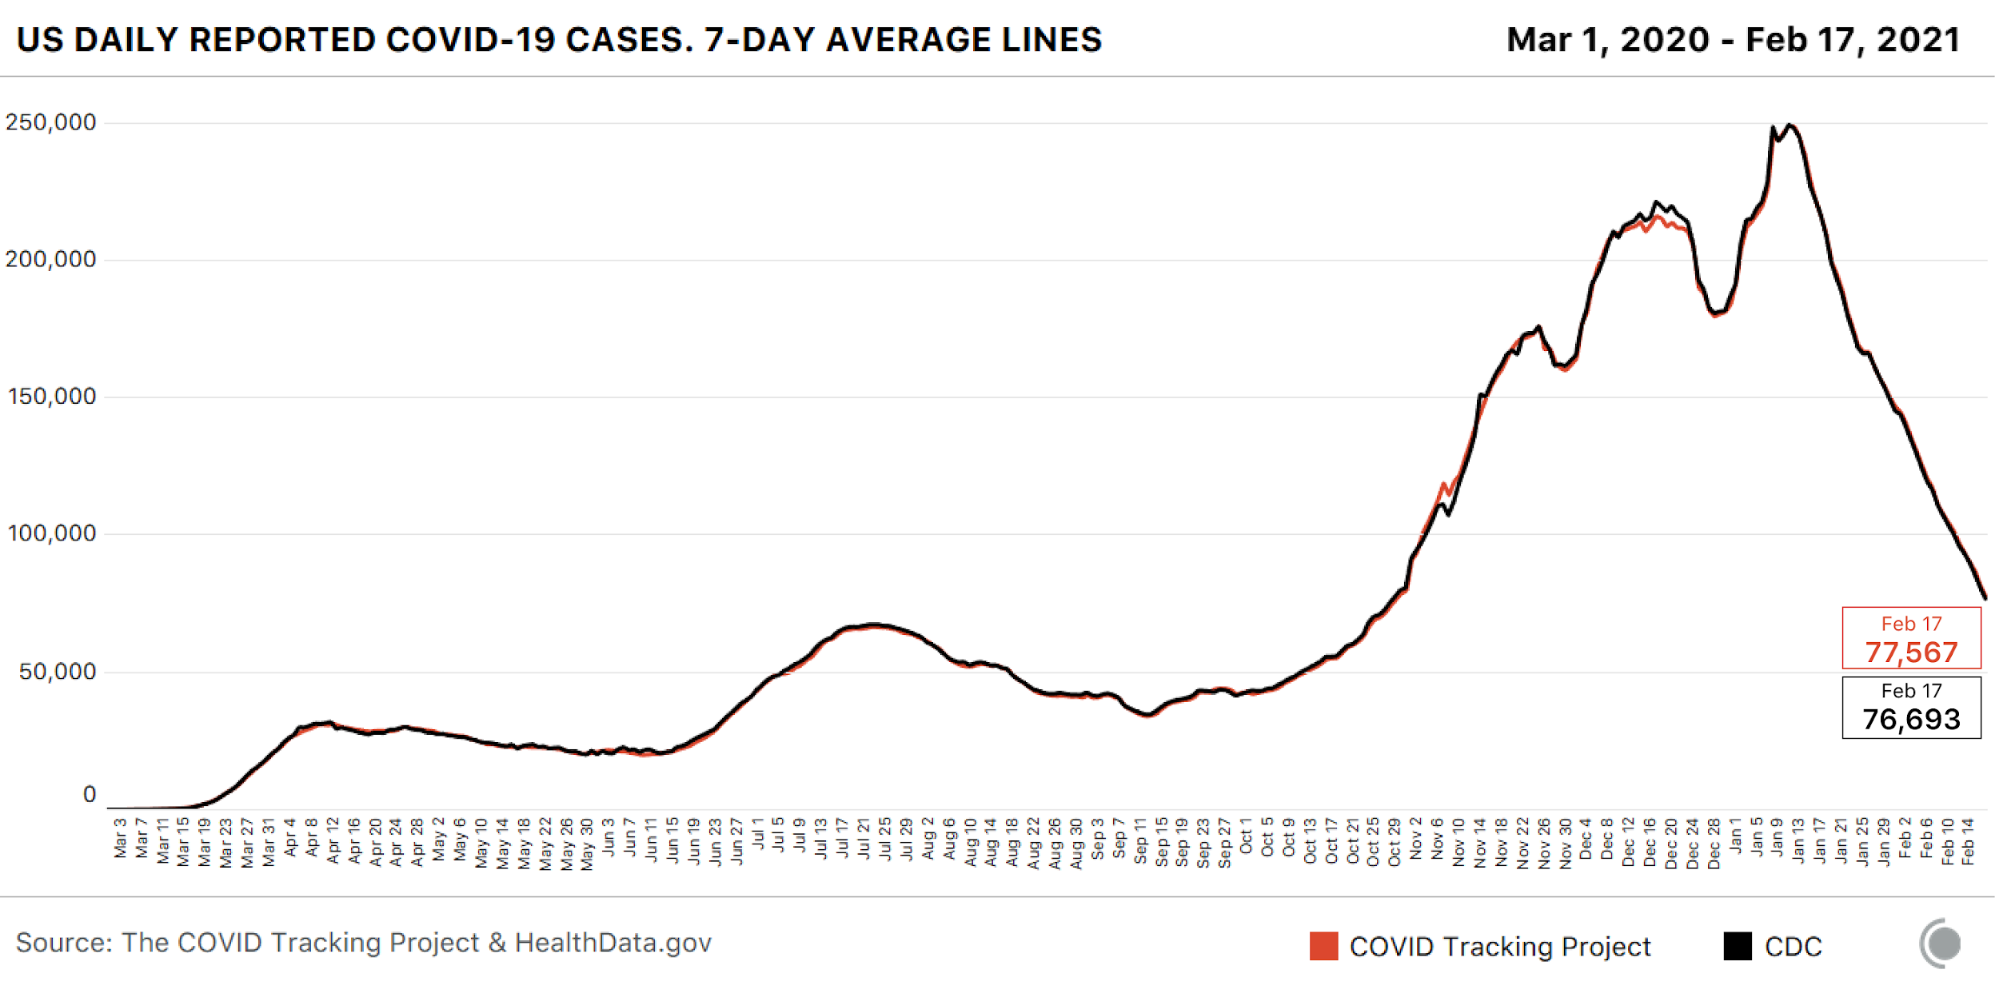 2 line charts showing COVID-19 cases over time (7-day average) for the US. One line is CDC data, the other is COVID Tracking Project data. The lines match almost perfectly.